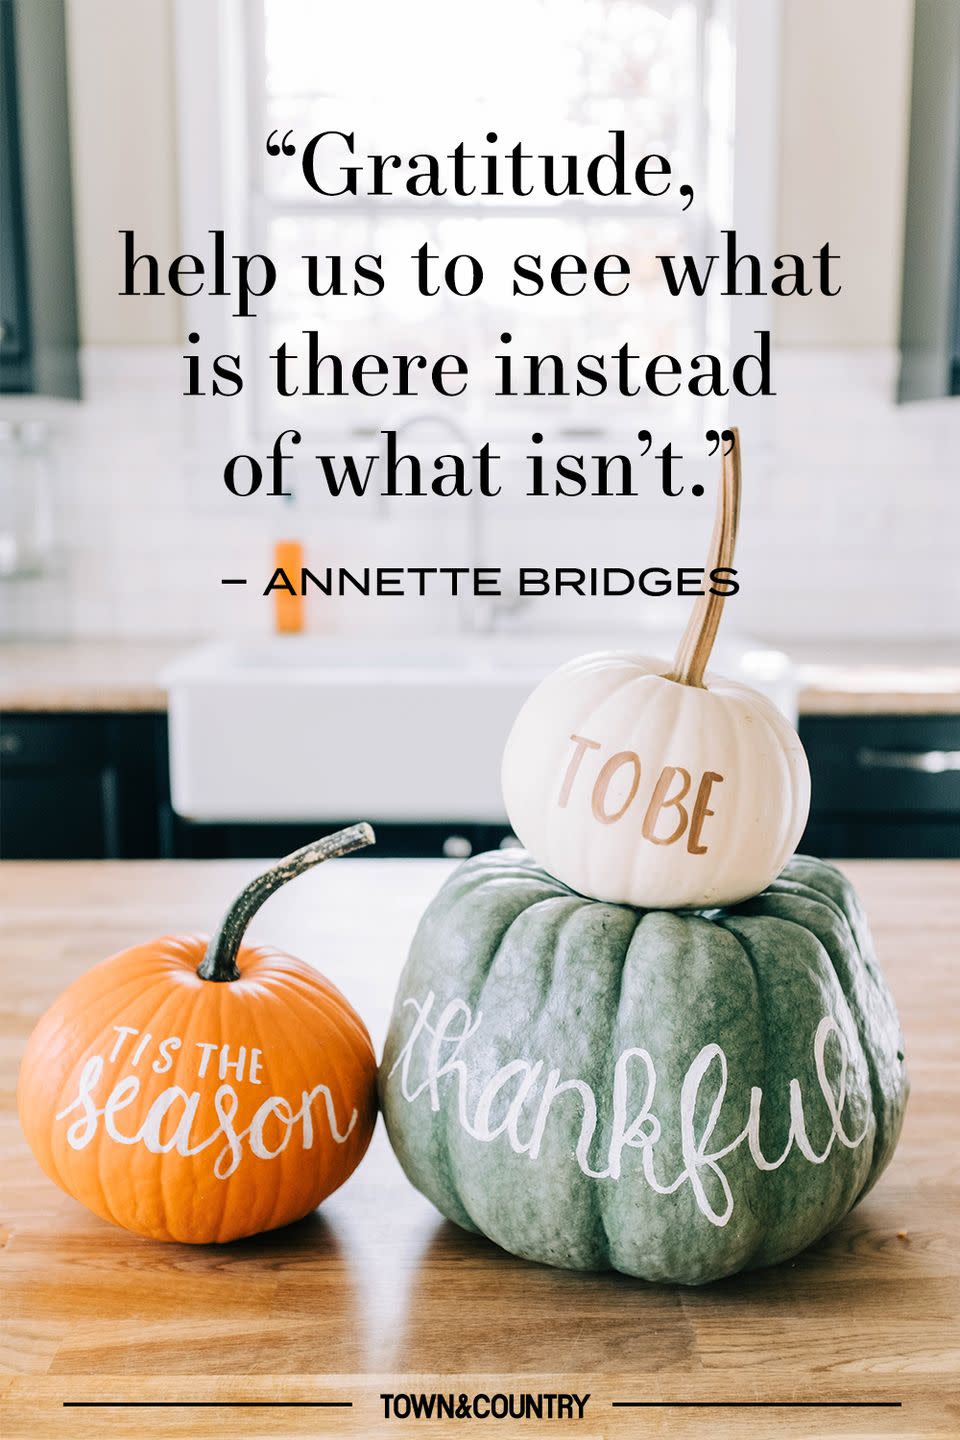 32 Quotes About Thanksgiving to Inspire Gratitude Ahead of the Holiday